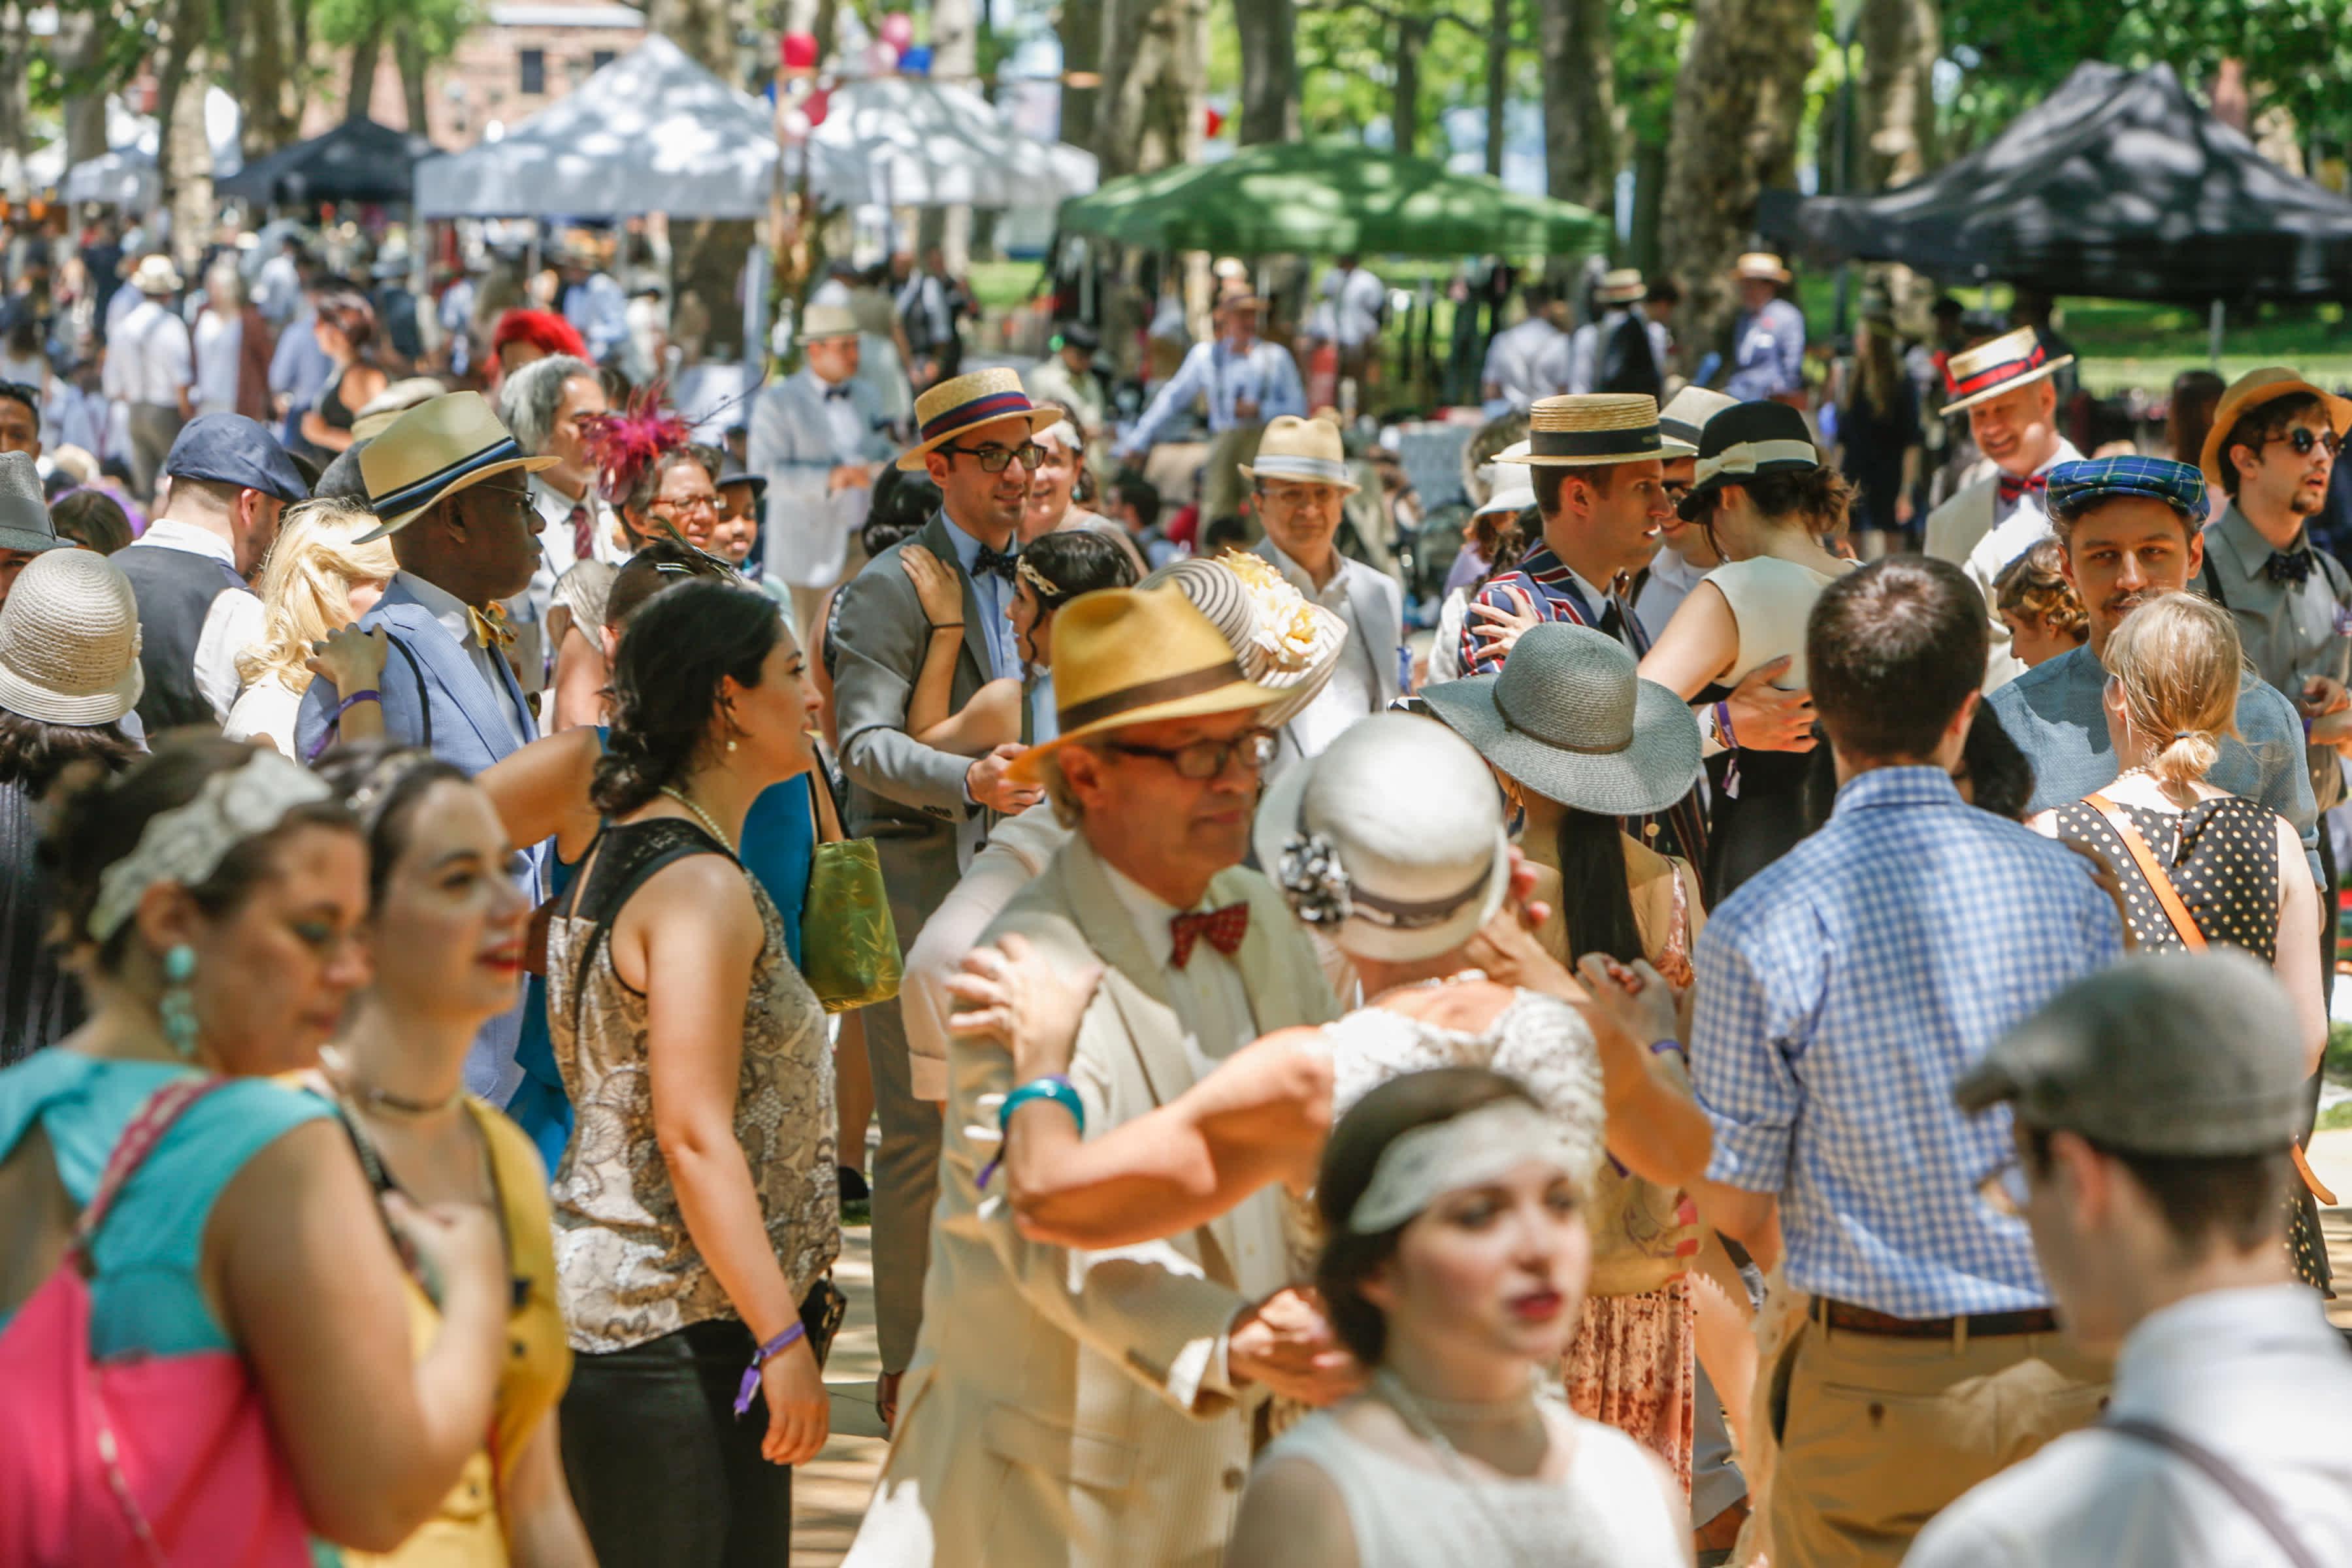 People dancing at the Jazz Age Lawn Party 